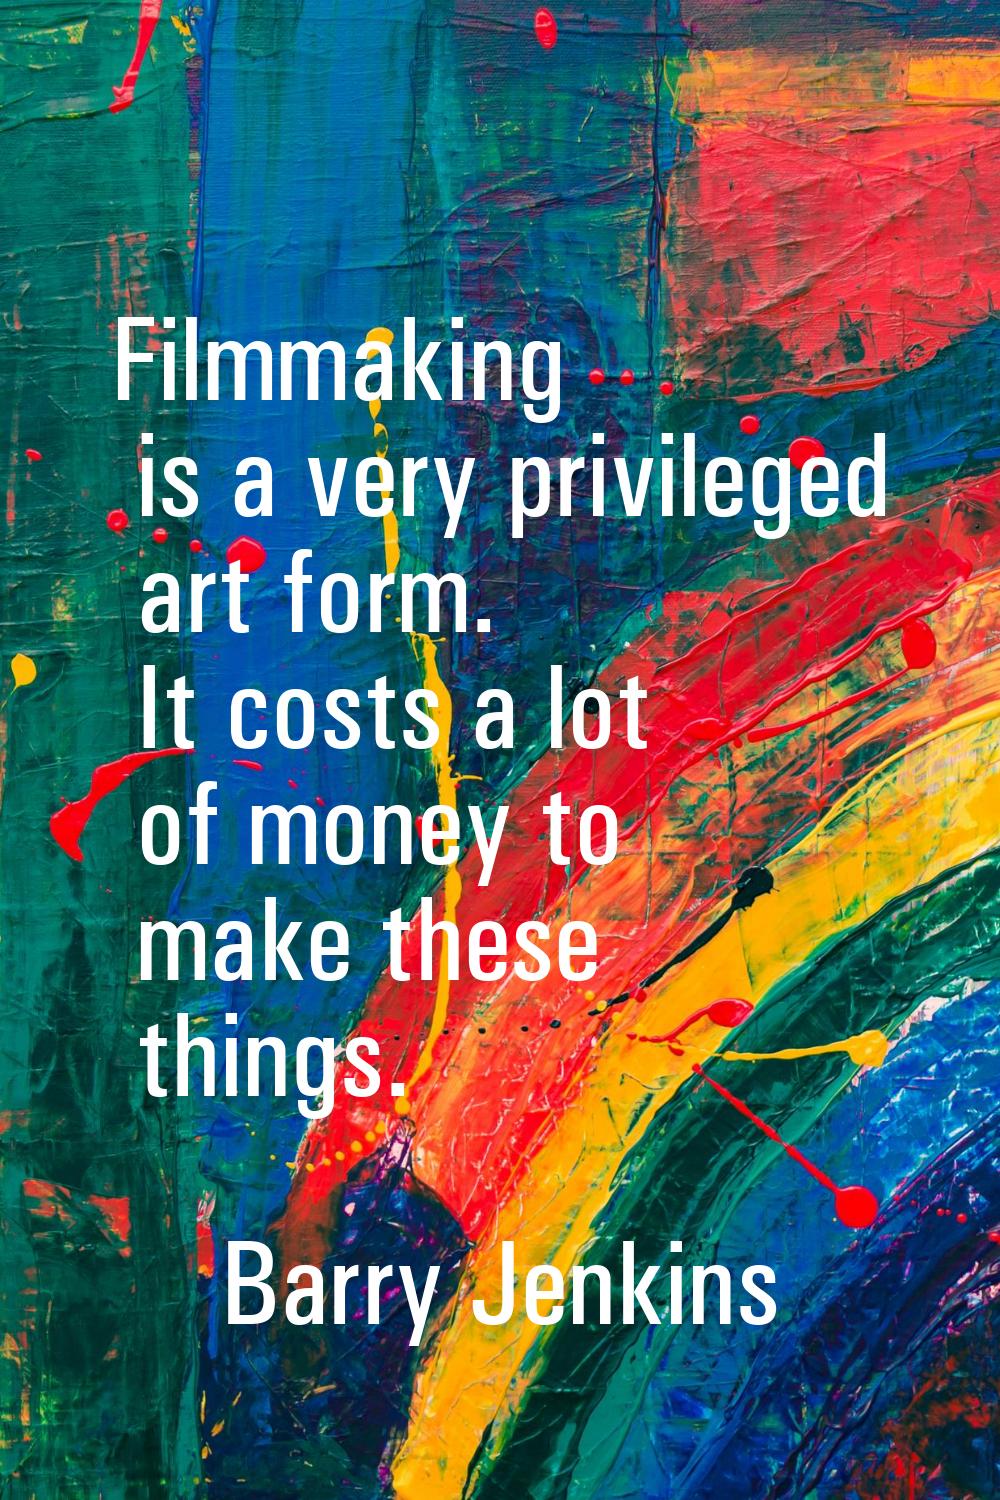 Filmmaking is a very privileged art form. It costs a lot of money to make these things.